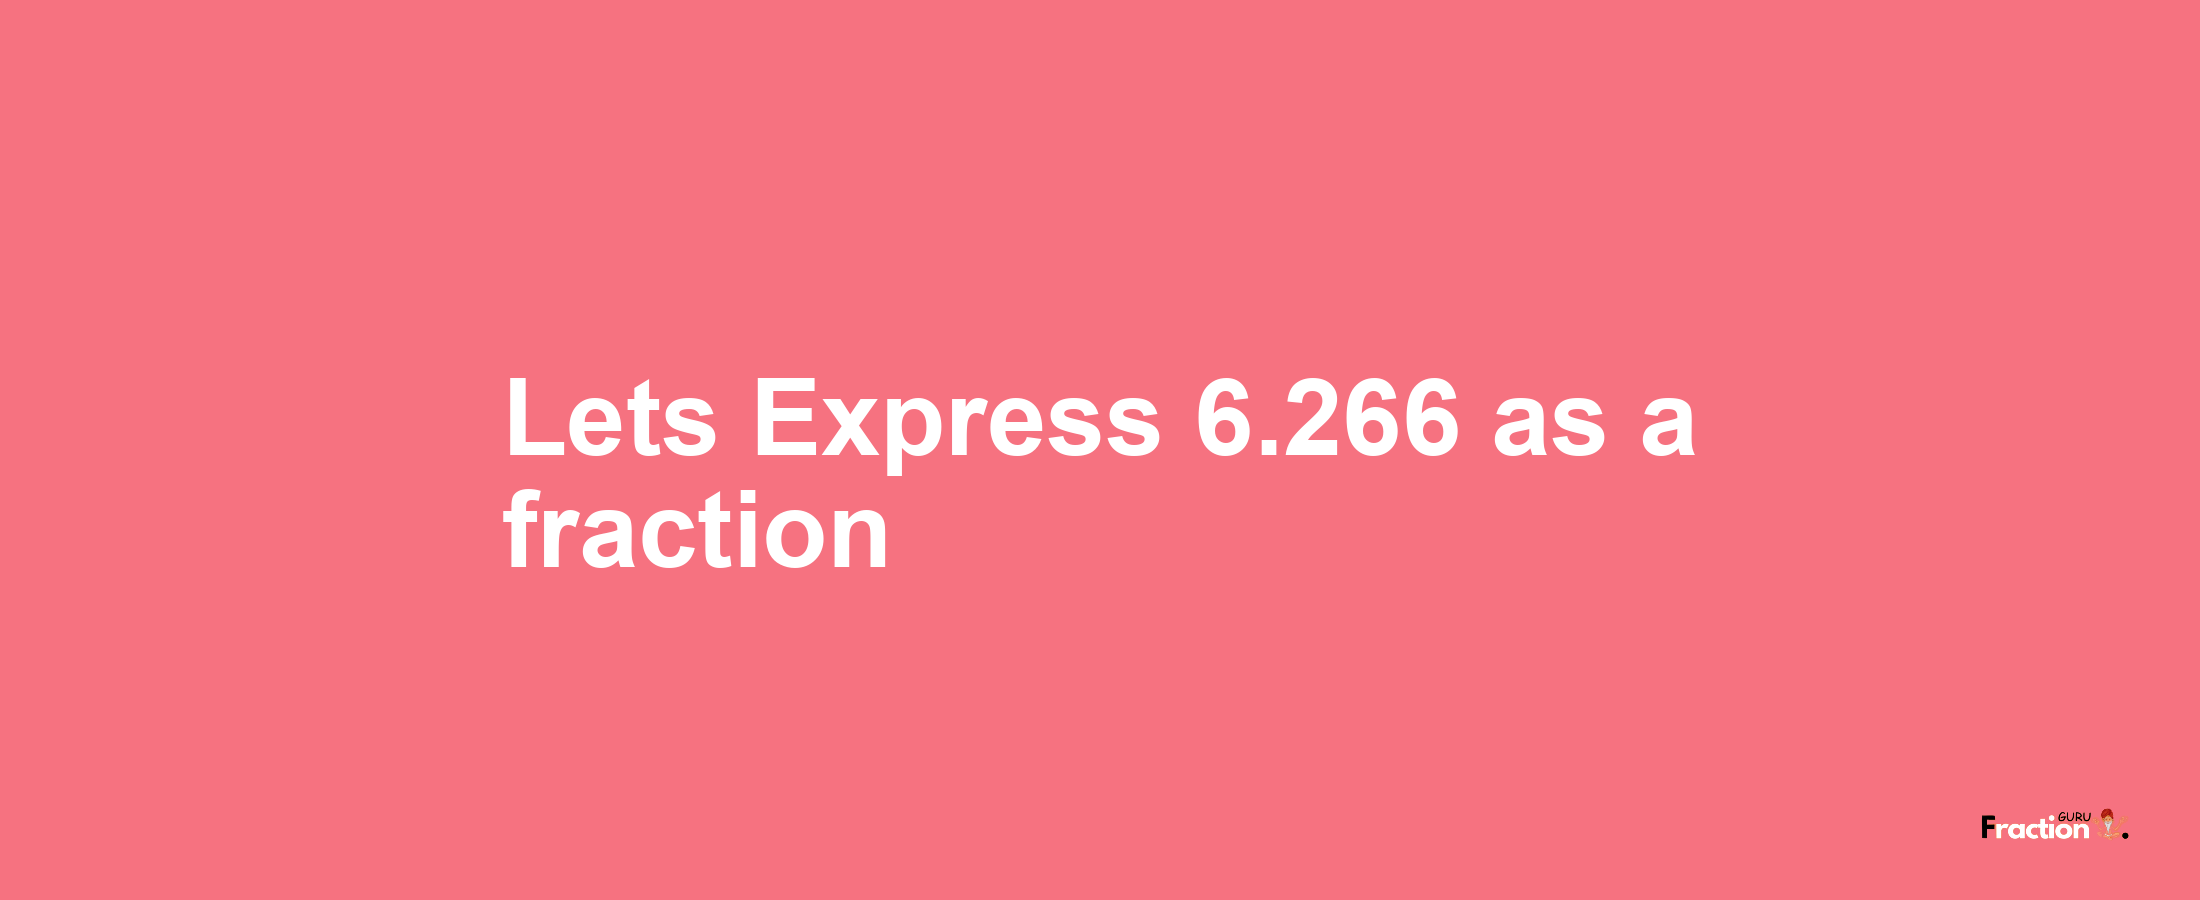 Lets Express 6.266 as afraction